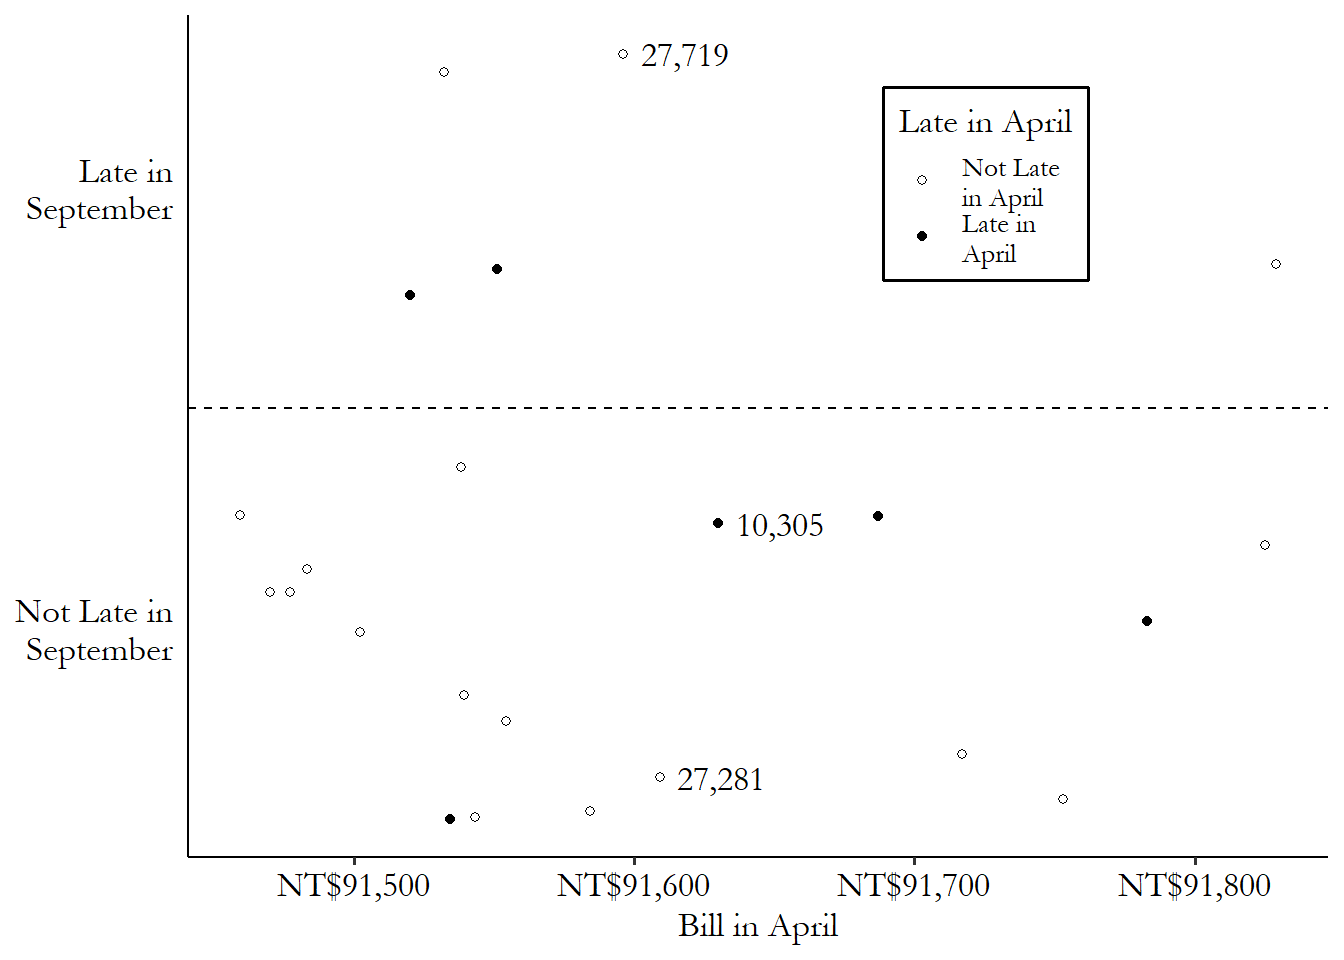 Scatterplot showing that row 10305, which is treated, is close on the x-axis to rows 27719 and 27281